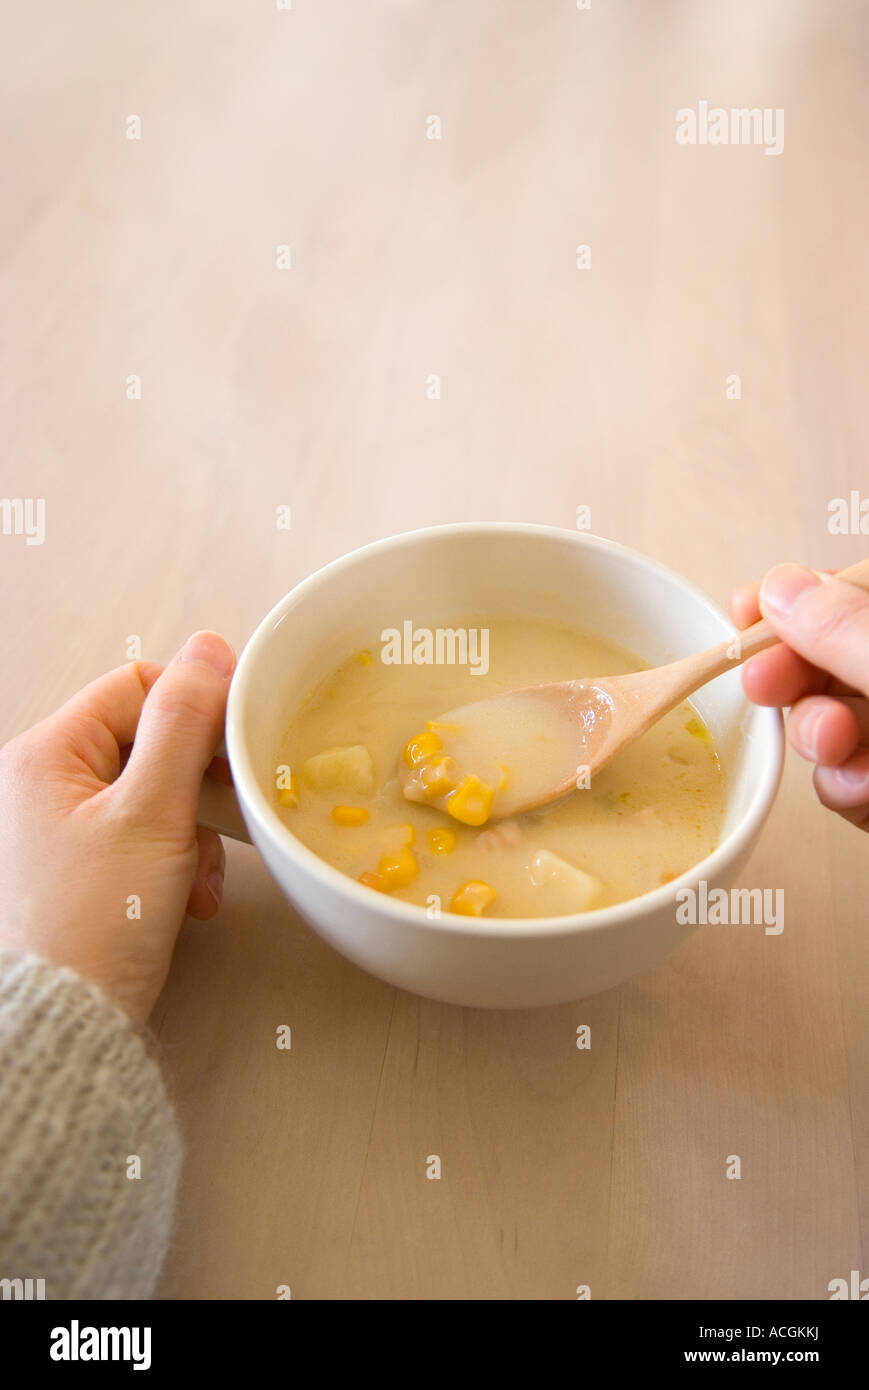 Cup of corn soup Stock Photo